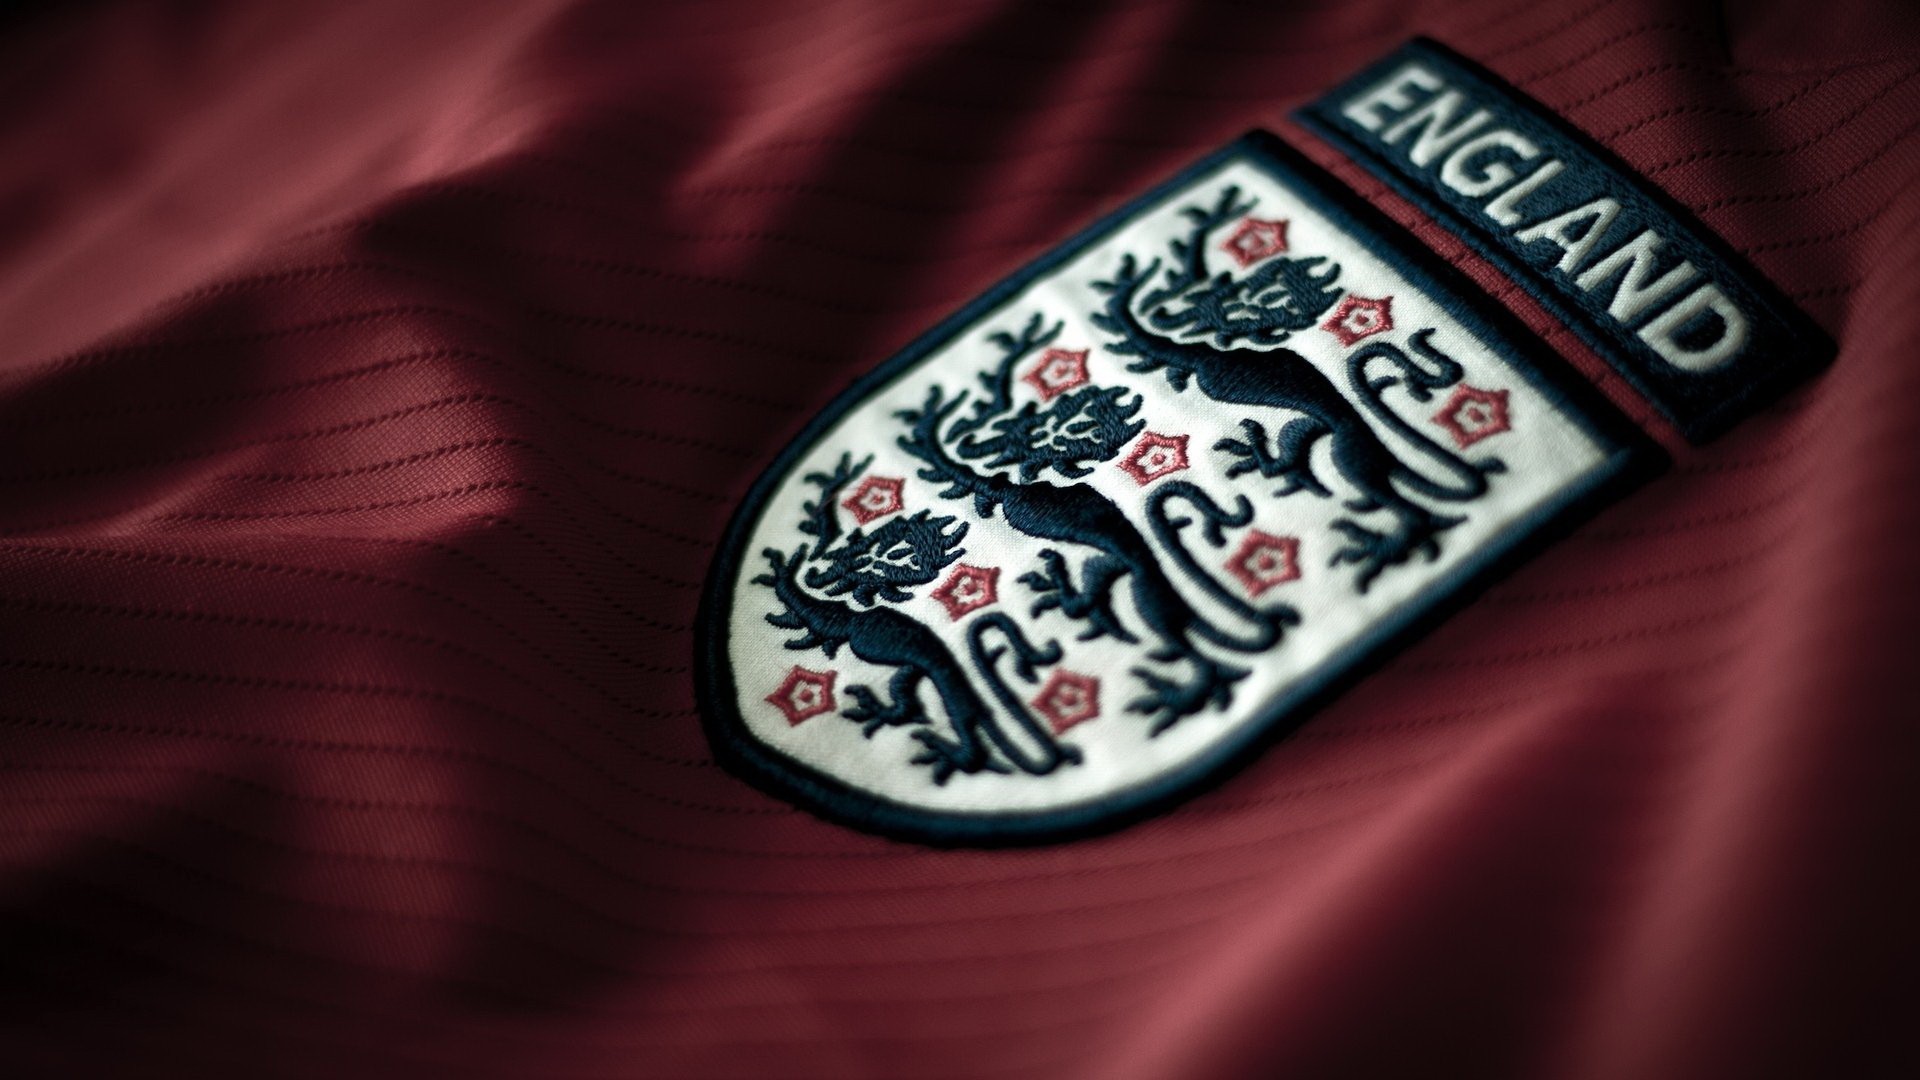 482 England HD Wallpapers 1920 X 1080 Px